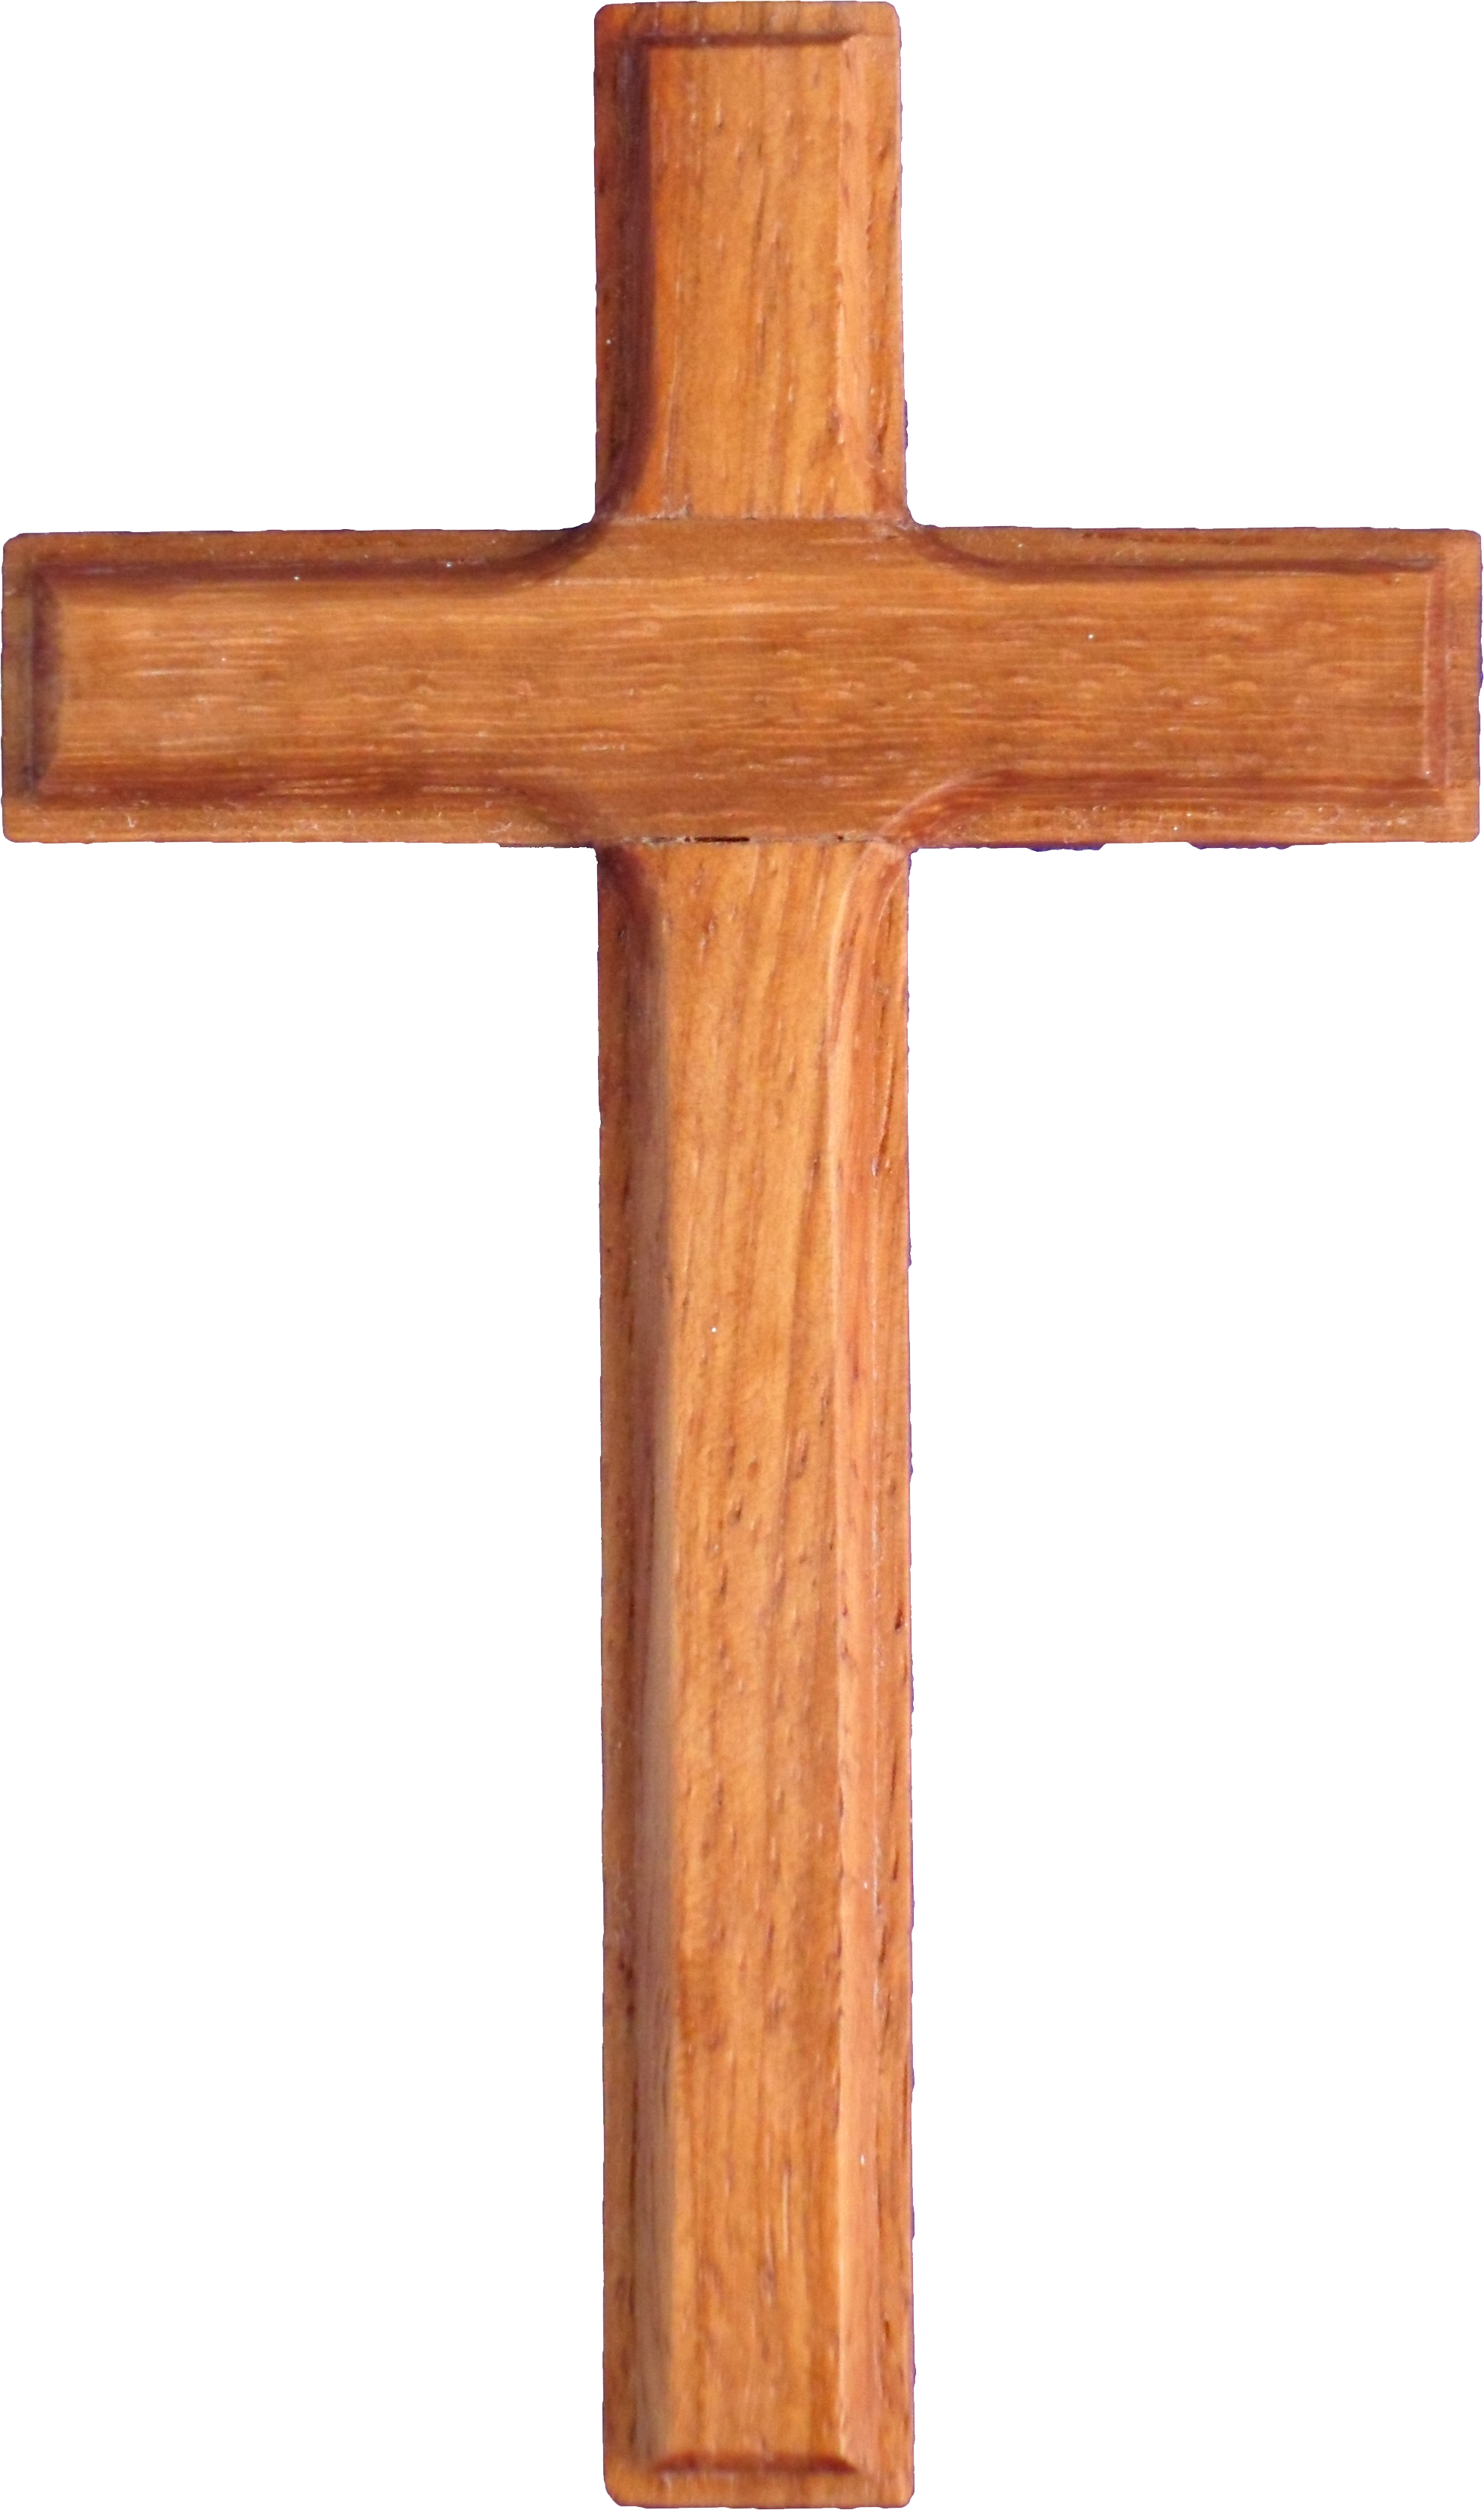 Christian Cross PNG Background Image